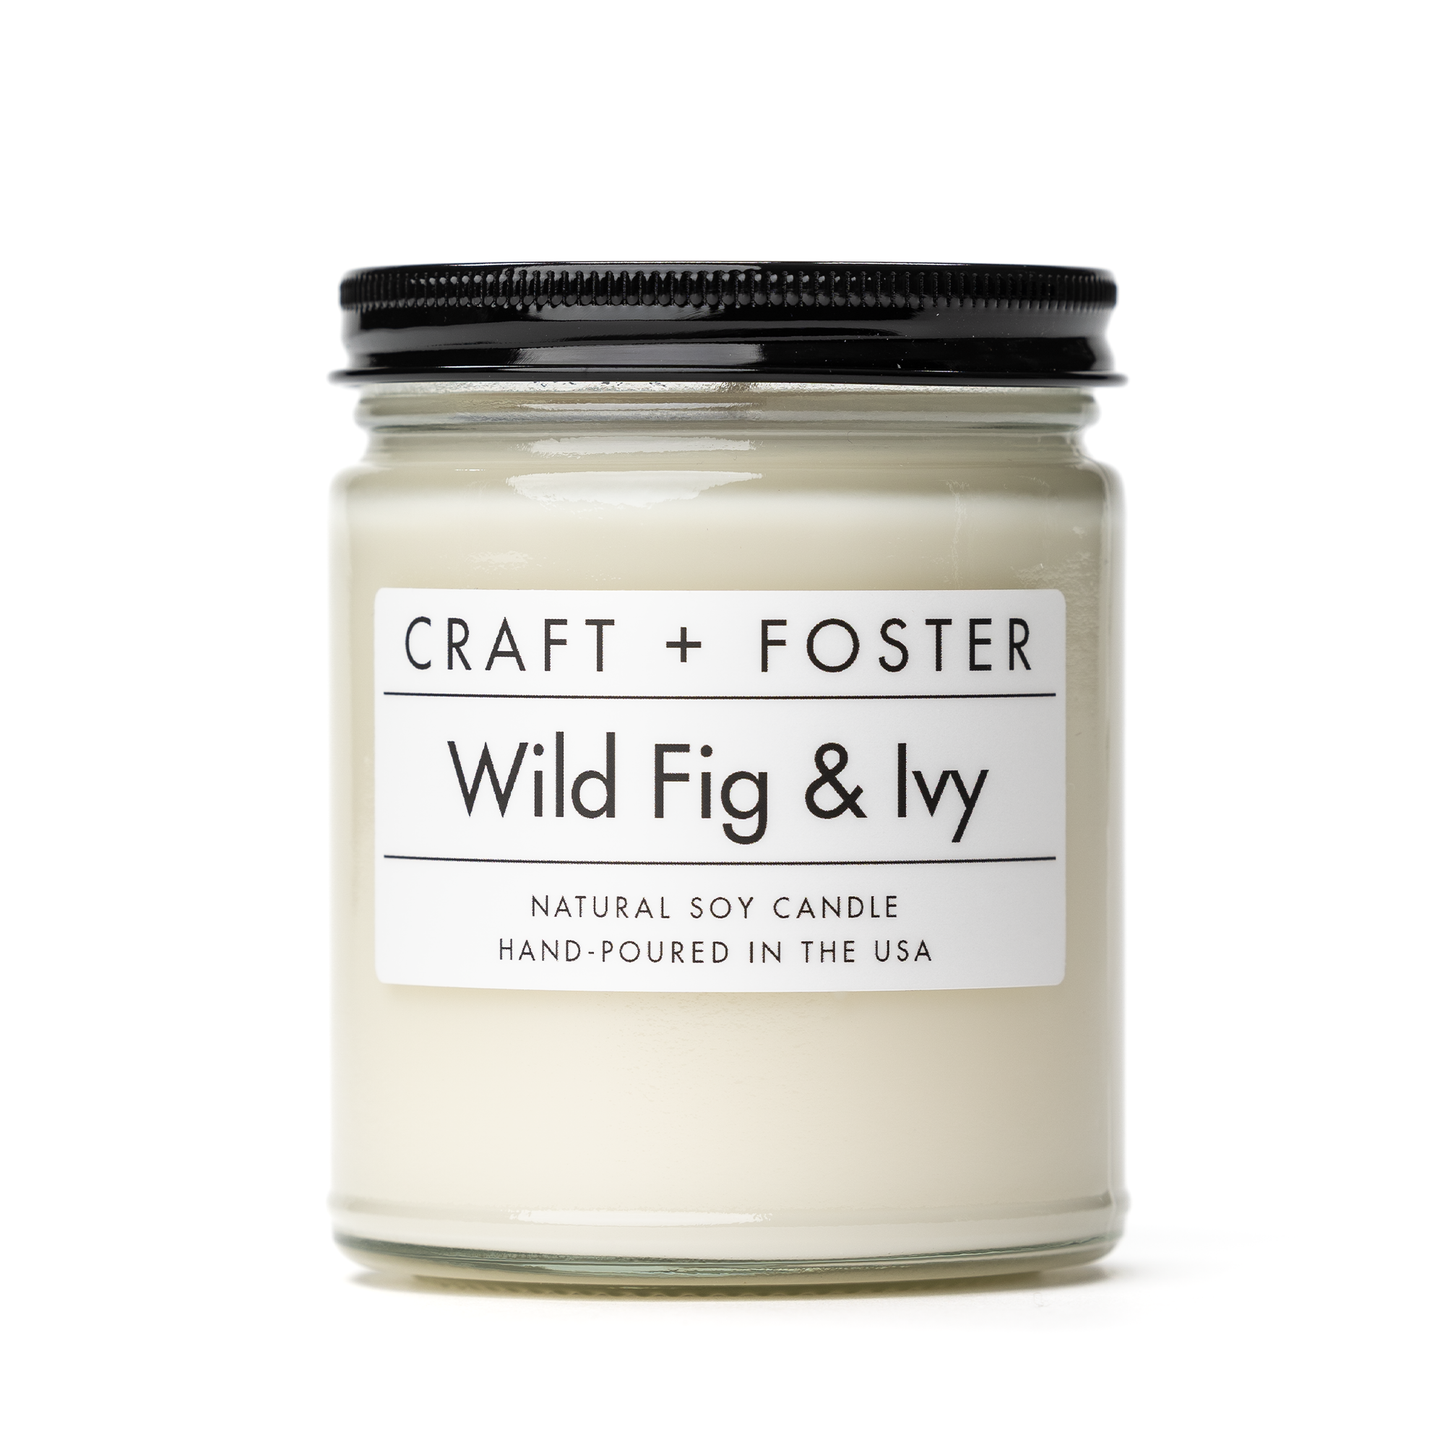 Wild Fig & Ivy Natural Soy Candle